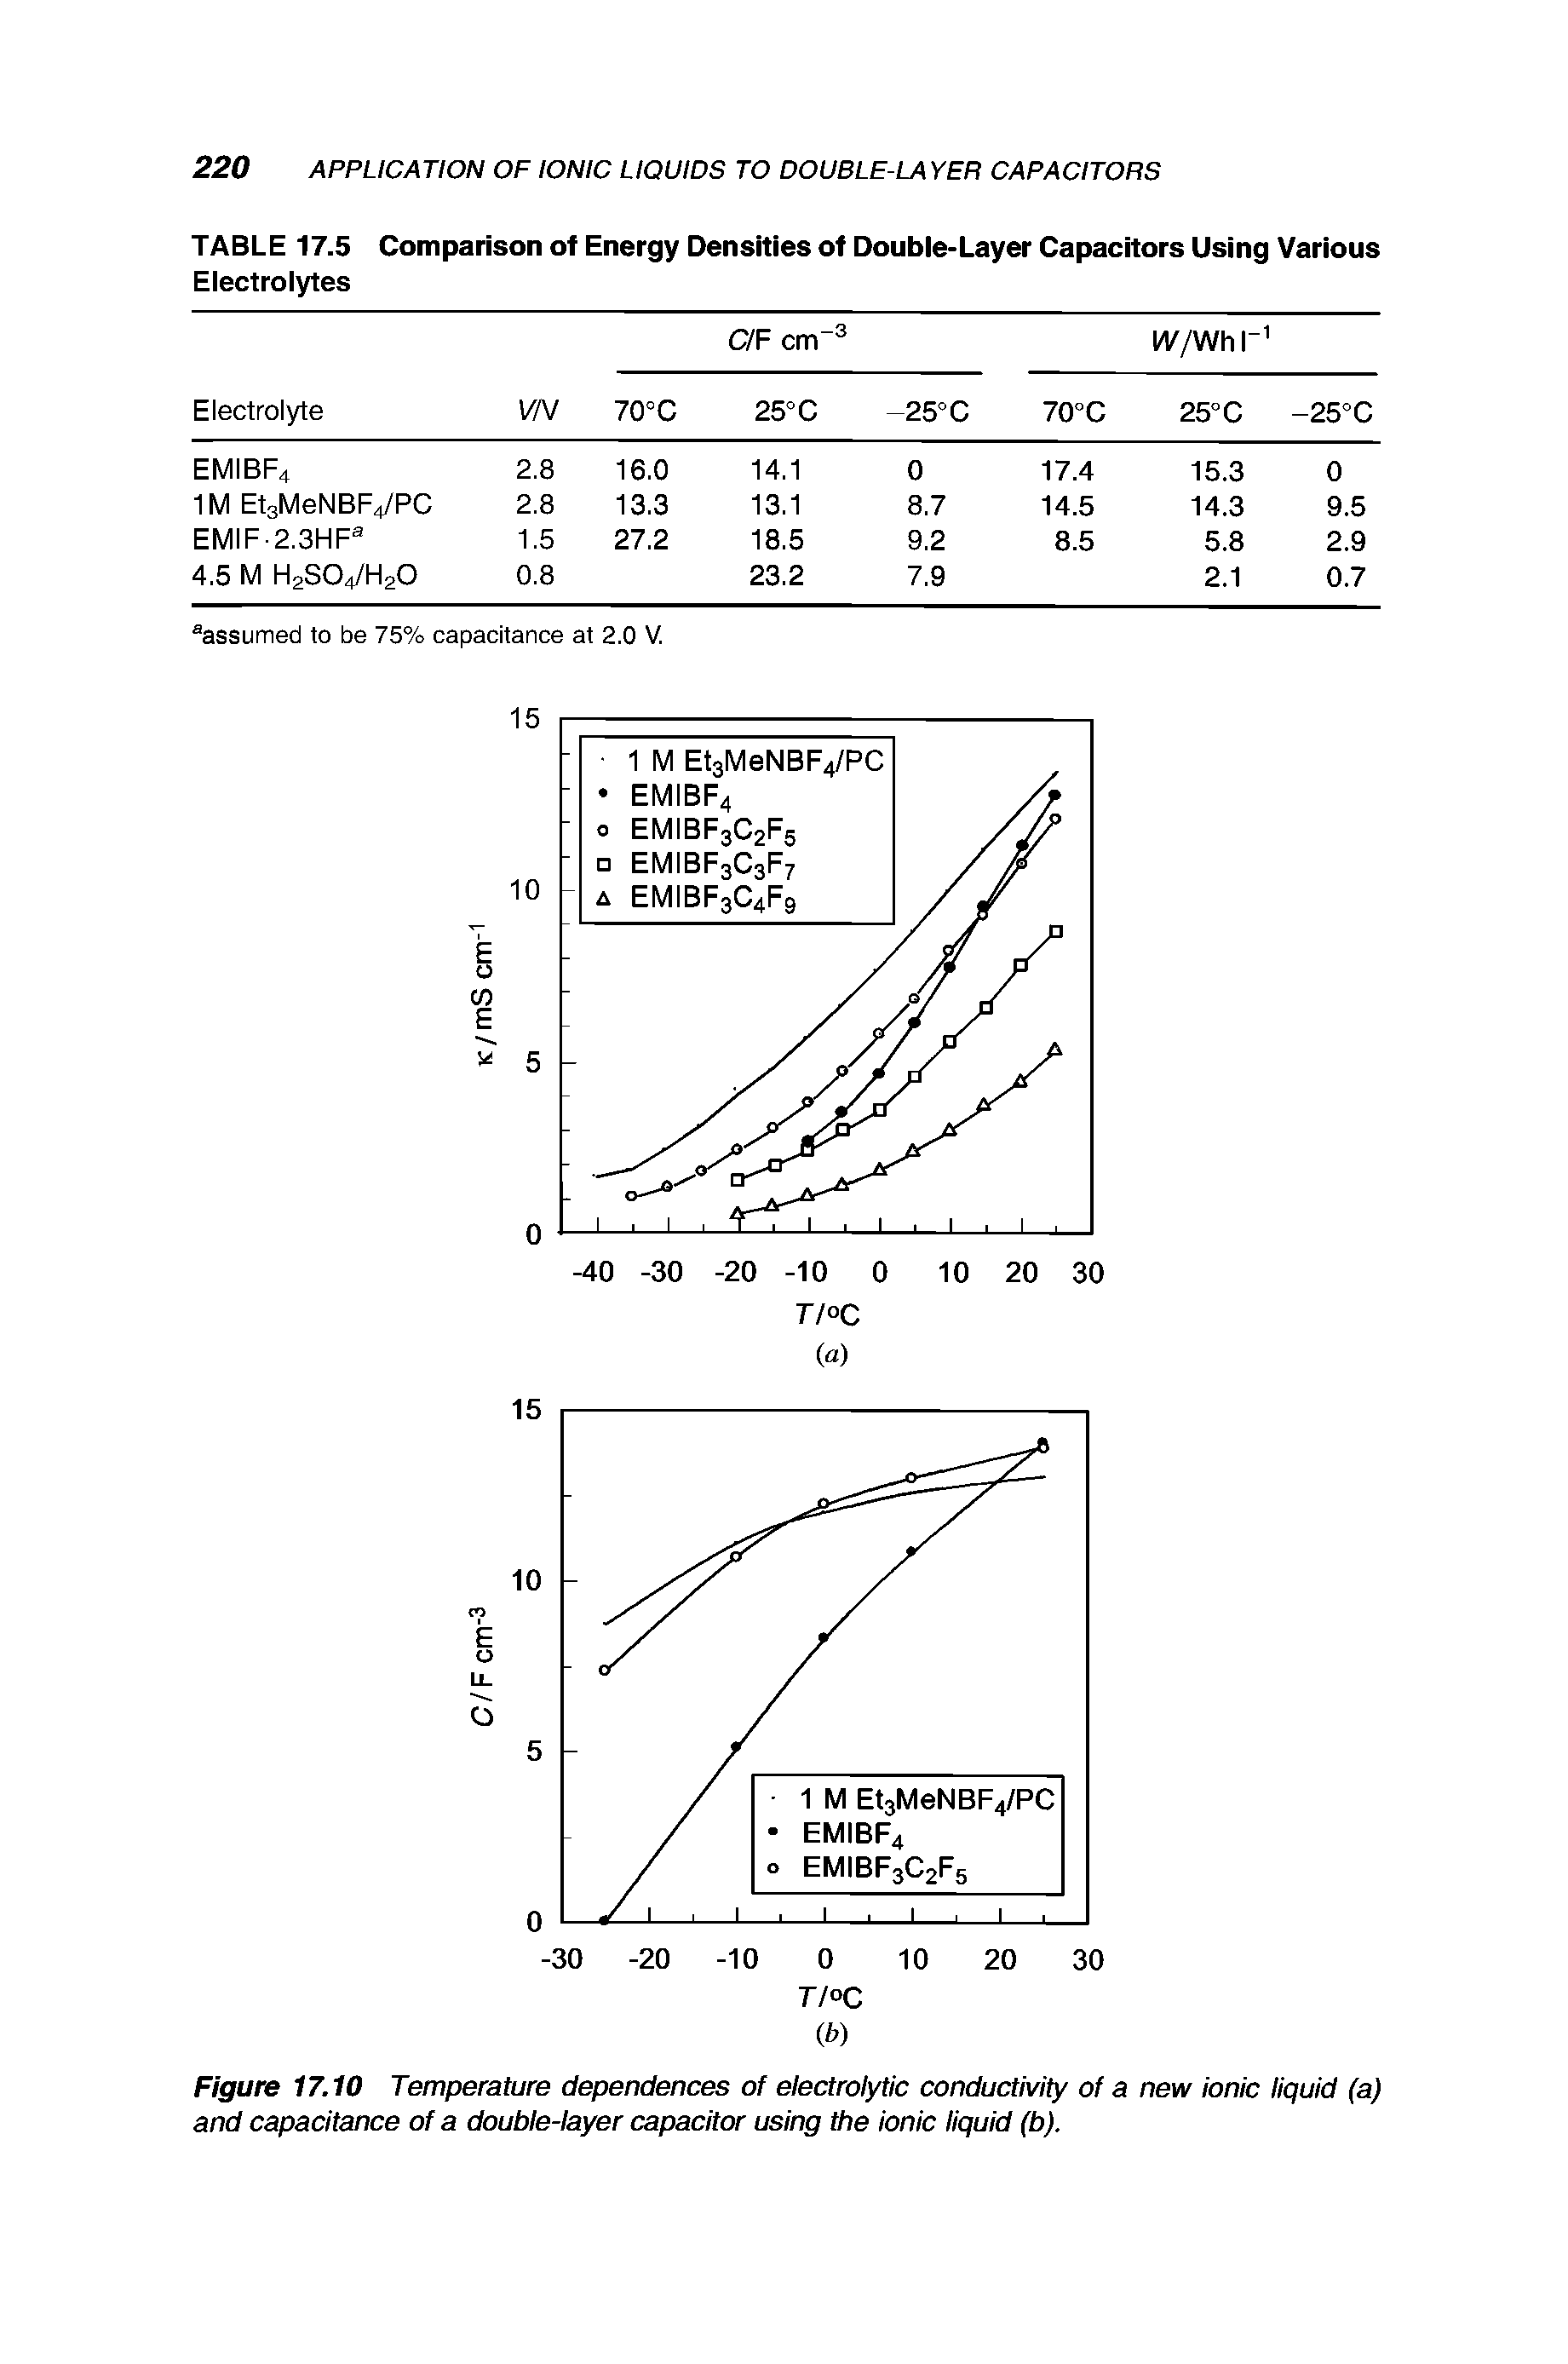 Figure 17.10 Temperature dependences of electrolytic conductivity of a new ionic liquid (a) and capacitance of a double-layer capacitor using the ionic liquid (b).